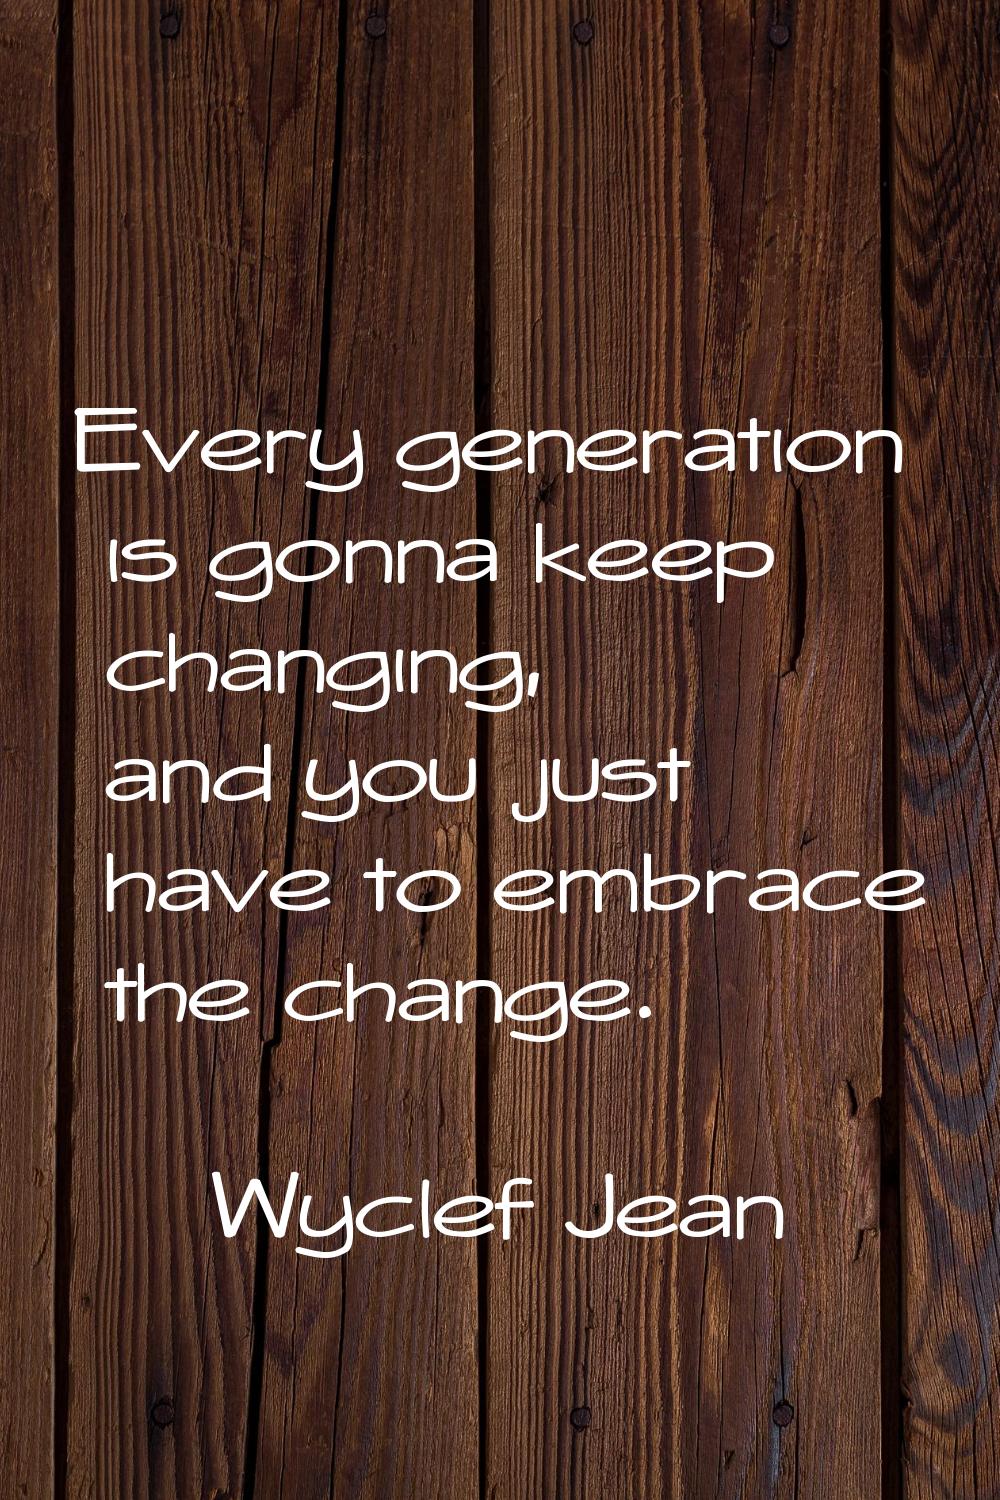 Every generation is gonna keep changing, and you just have to embrace the change.